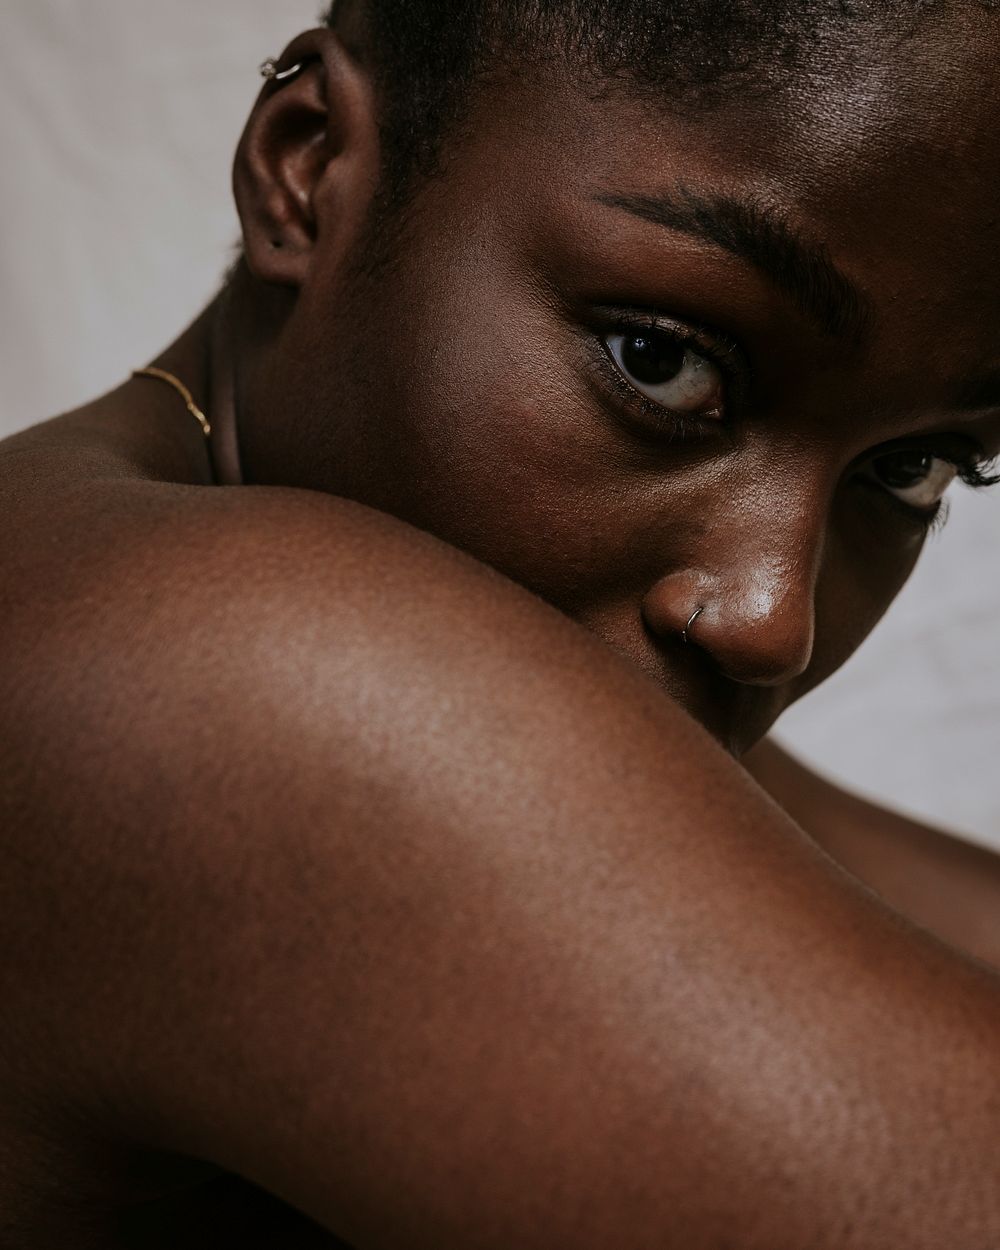 African woman looking over bare shoulder photo